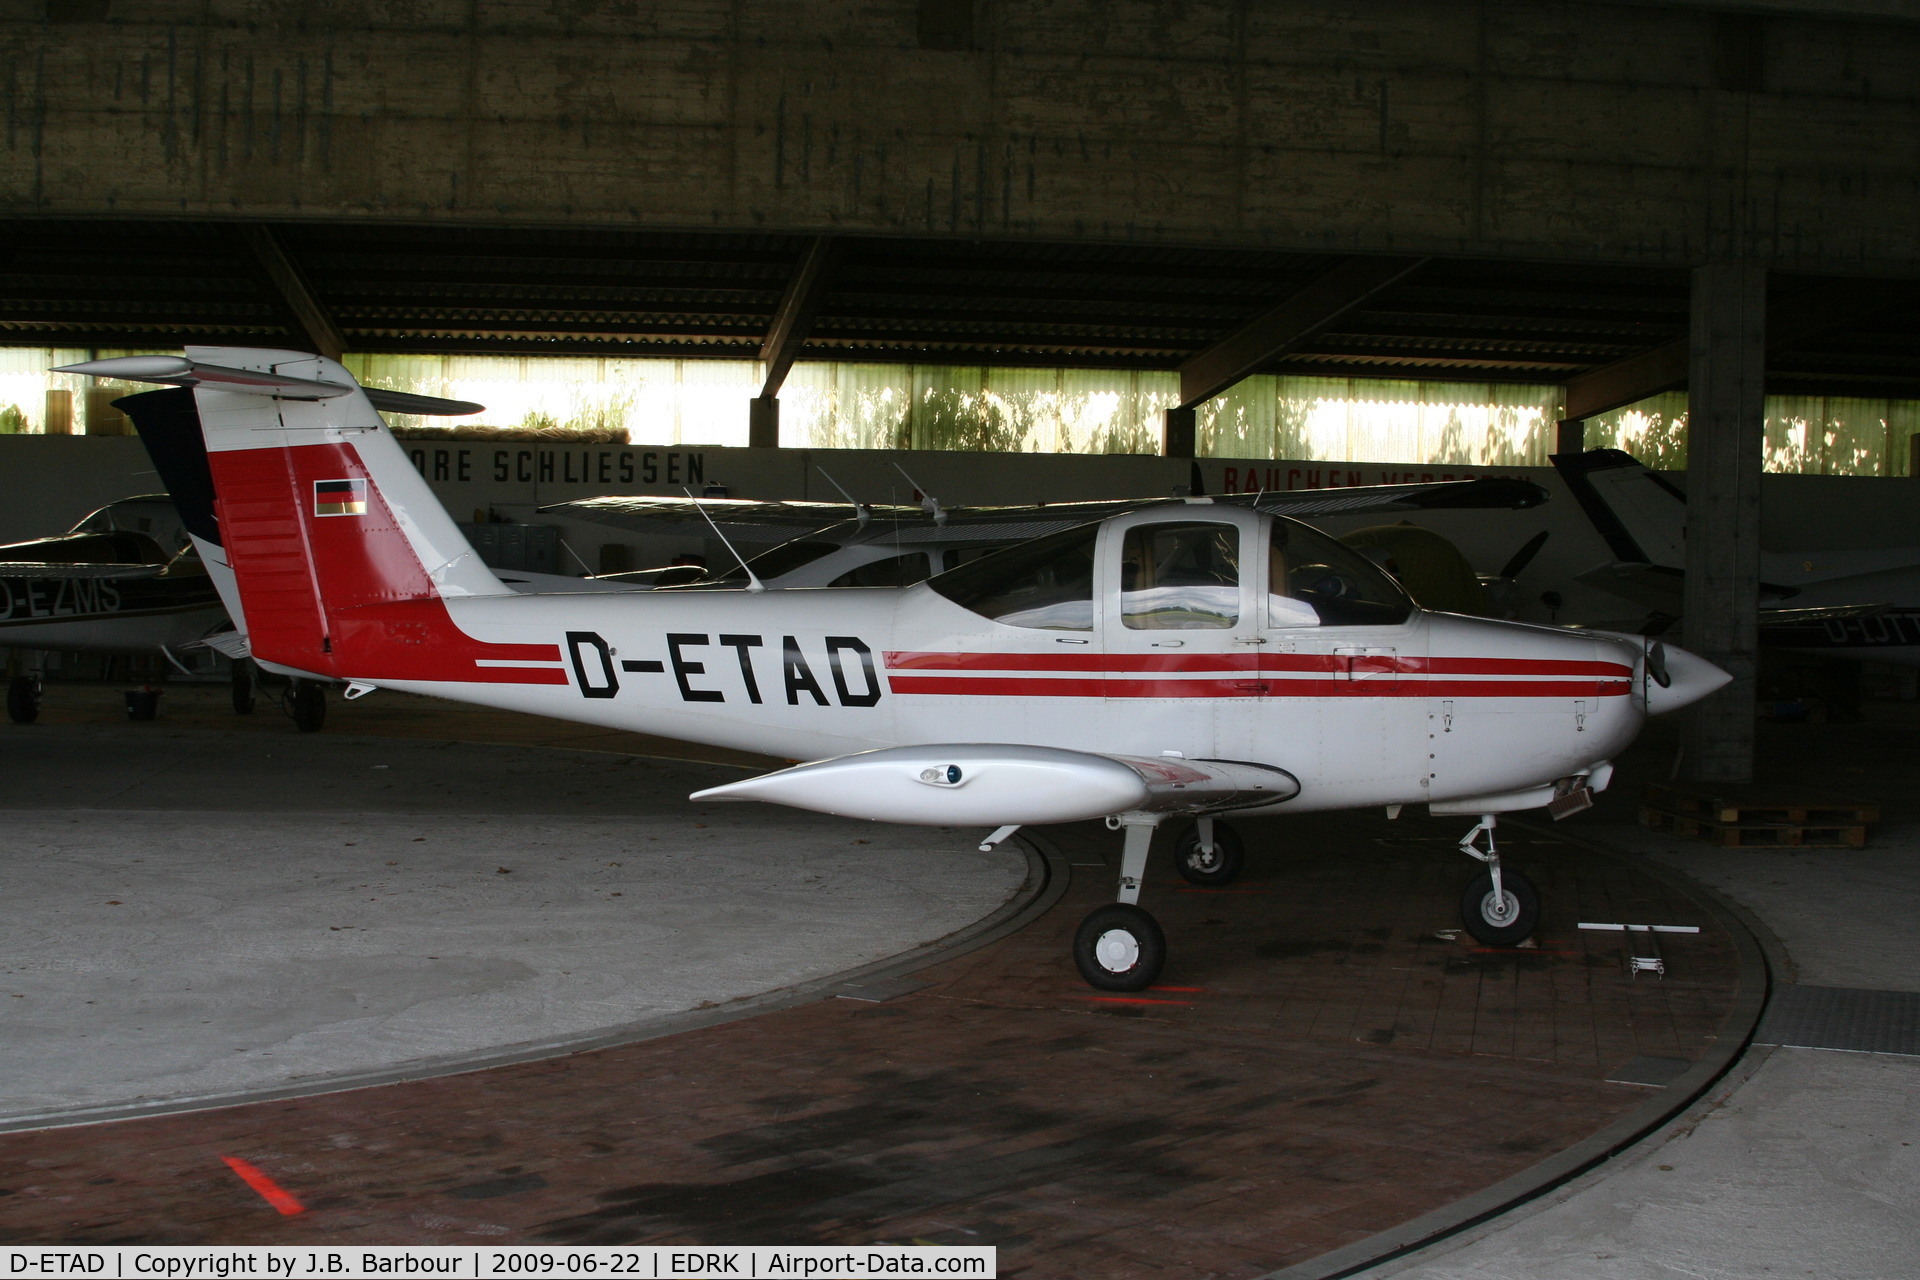 D-ETAD, 1979 Piper PA-38-112 Tomahawk Tomahawk C/N 38-79A0220, 1979 Piper Tomahawk PA-38-112 c/n 38-79A0220.  This plane was registered before under N2534C before being brought to Germany.